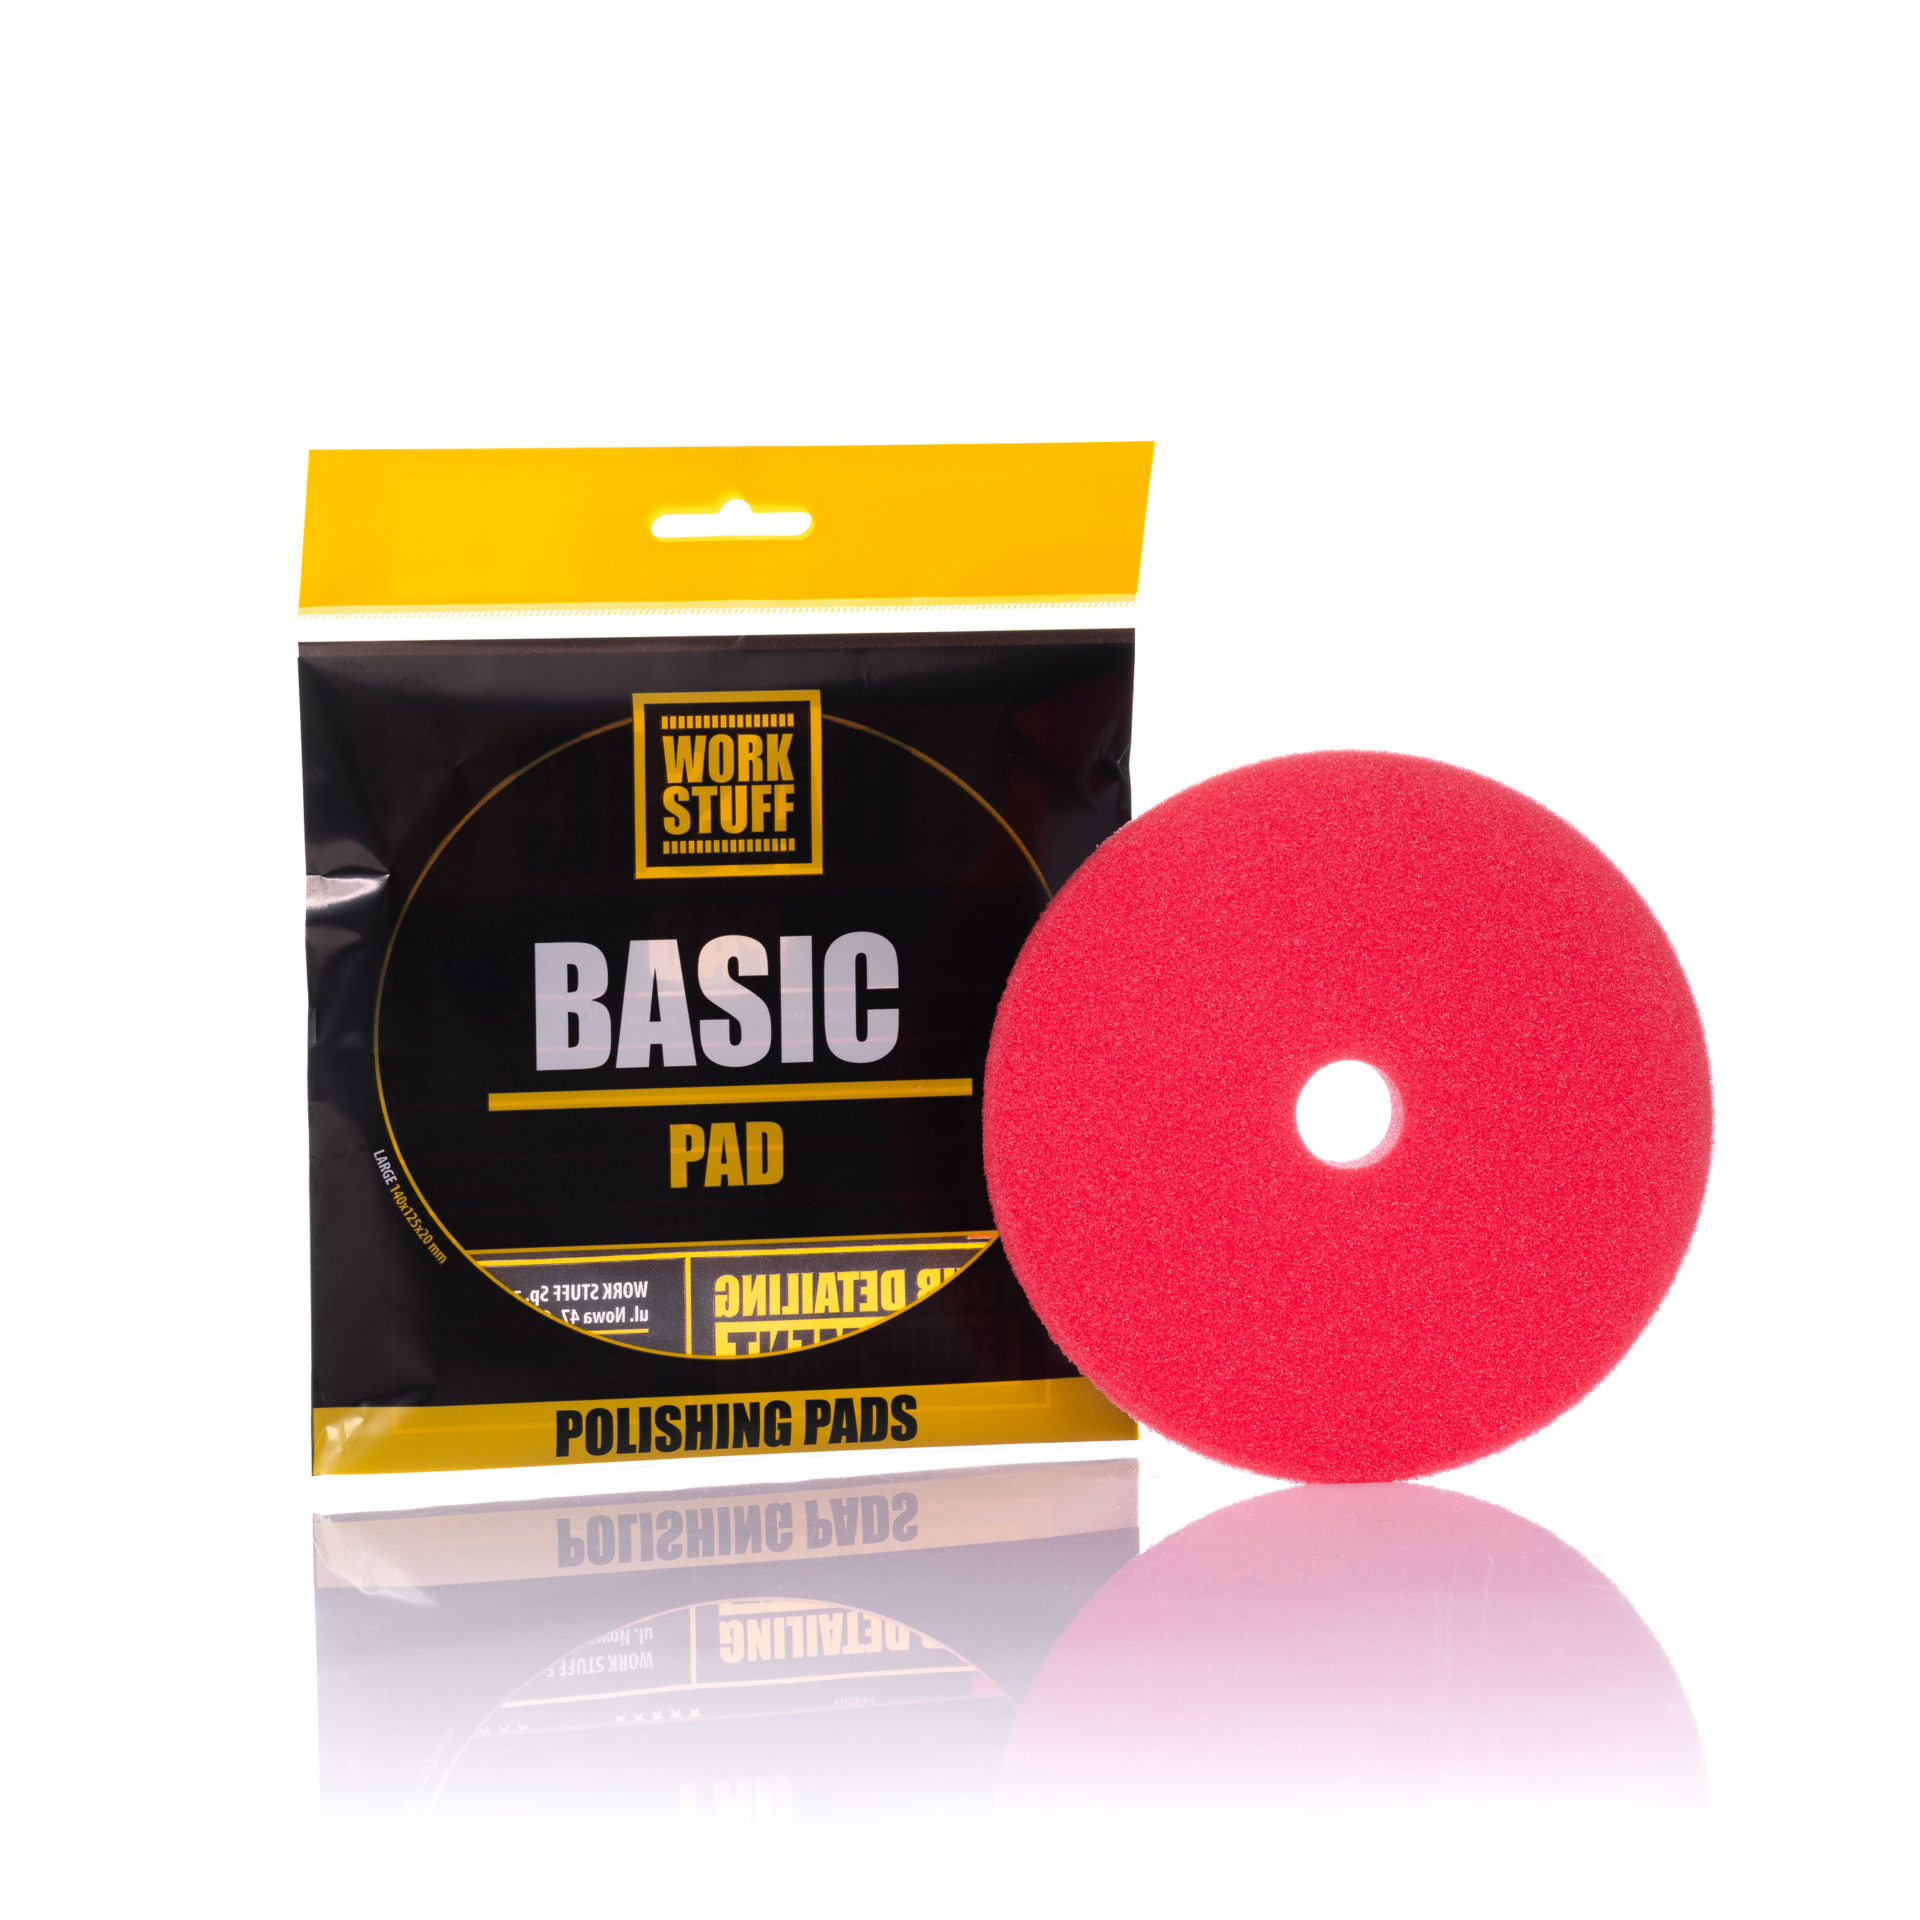 Bring out the maximum shine on your car with the Work Stuff Basic Pad Finish. This soft, low-abrasion polishing pad removes minor imperfections and leaves a high gloss finish.